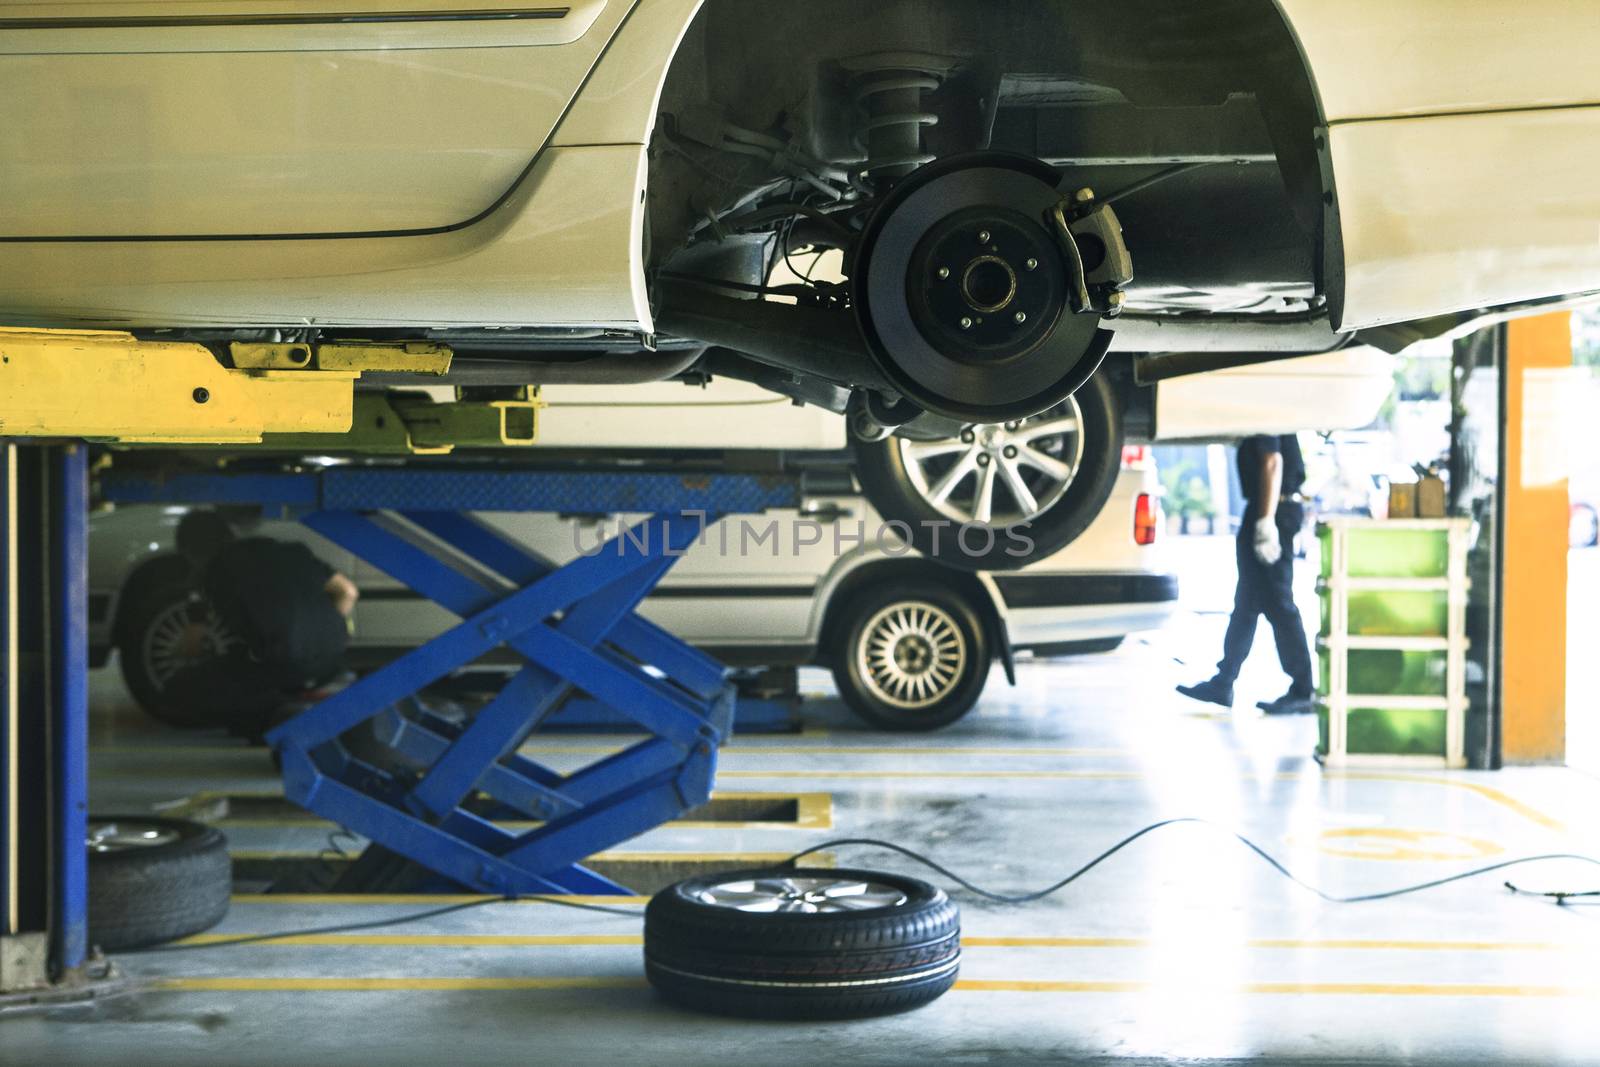  car wheel  suspension and brake system maintenance in auto serv by khunaspix